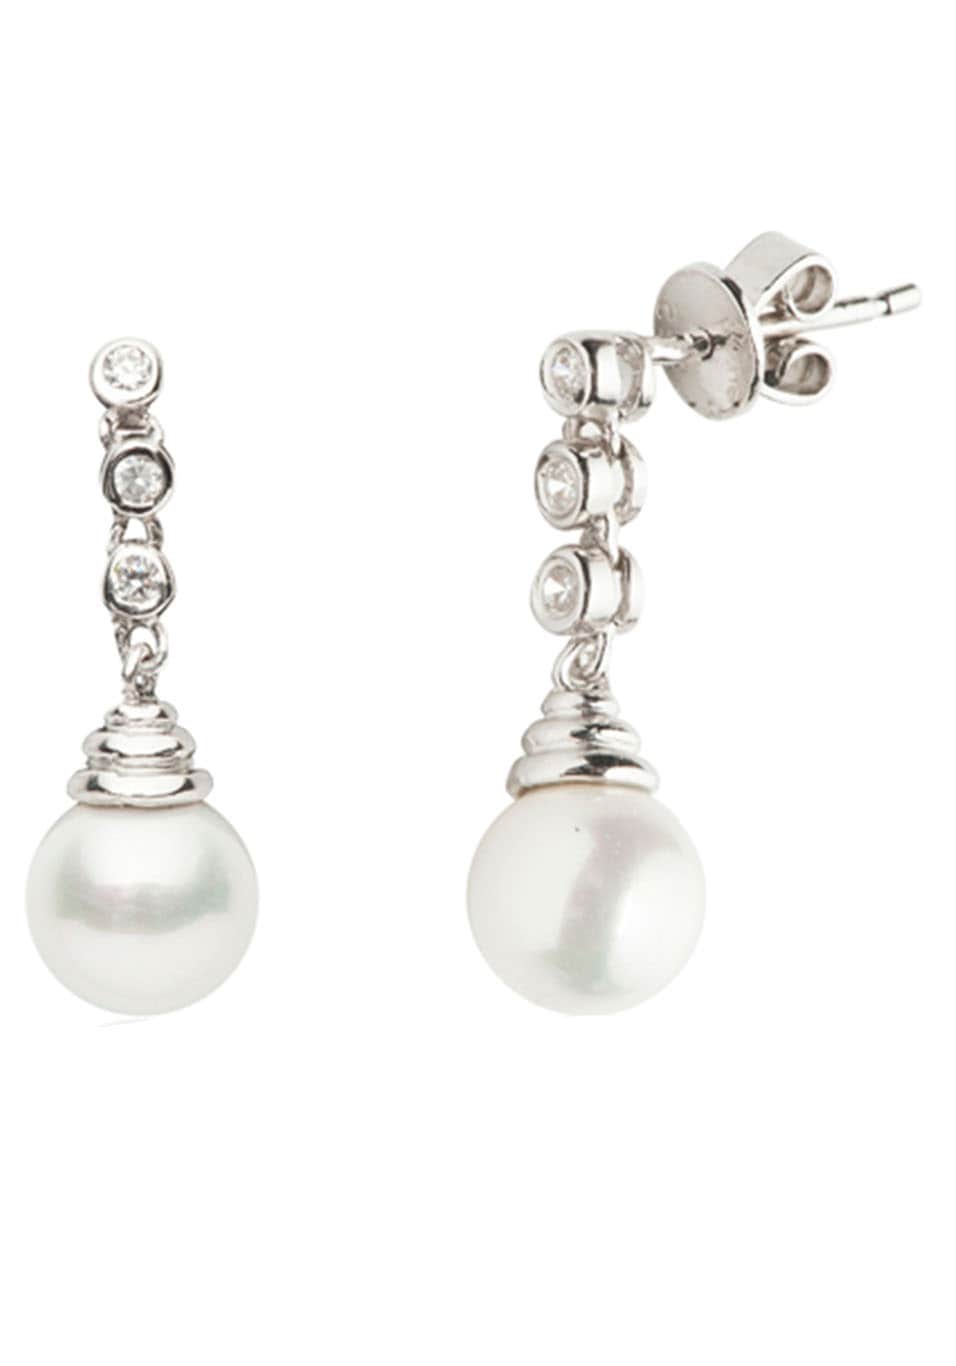 UNIKE JEWELLERY PEARL, Zirkonia Ohrstecker online Perle UK.BR.1204.0001«, mit (synth.) Paar »CLASSY mit (synth.) 